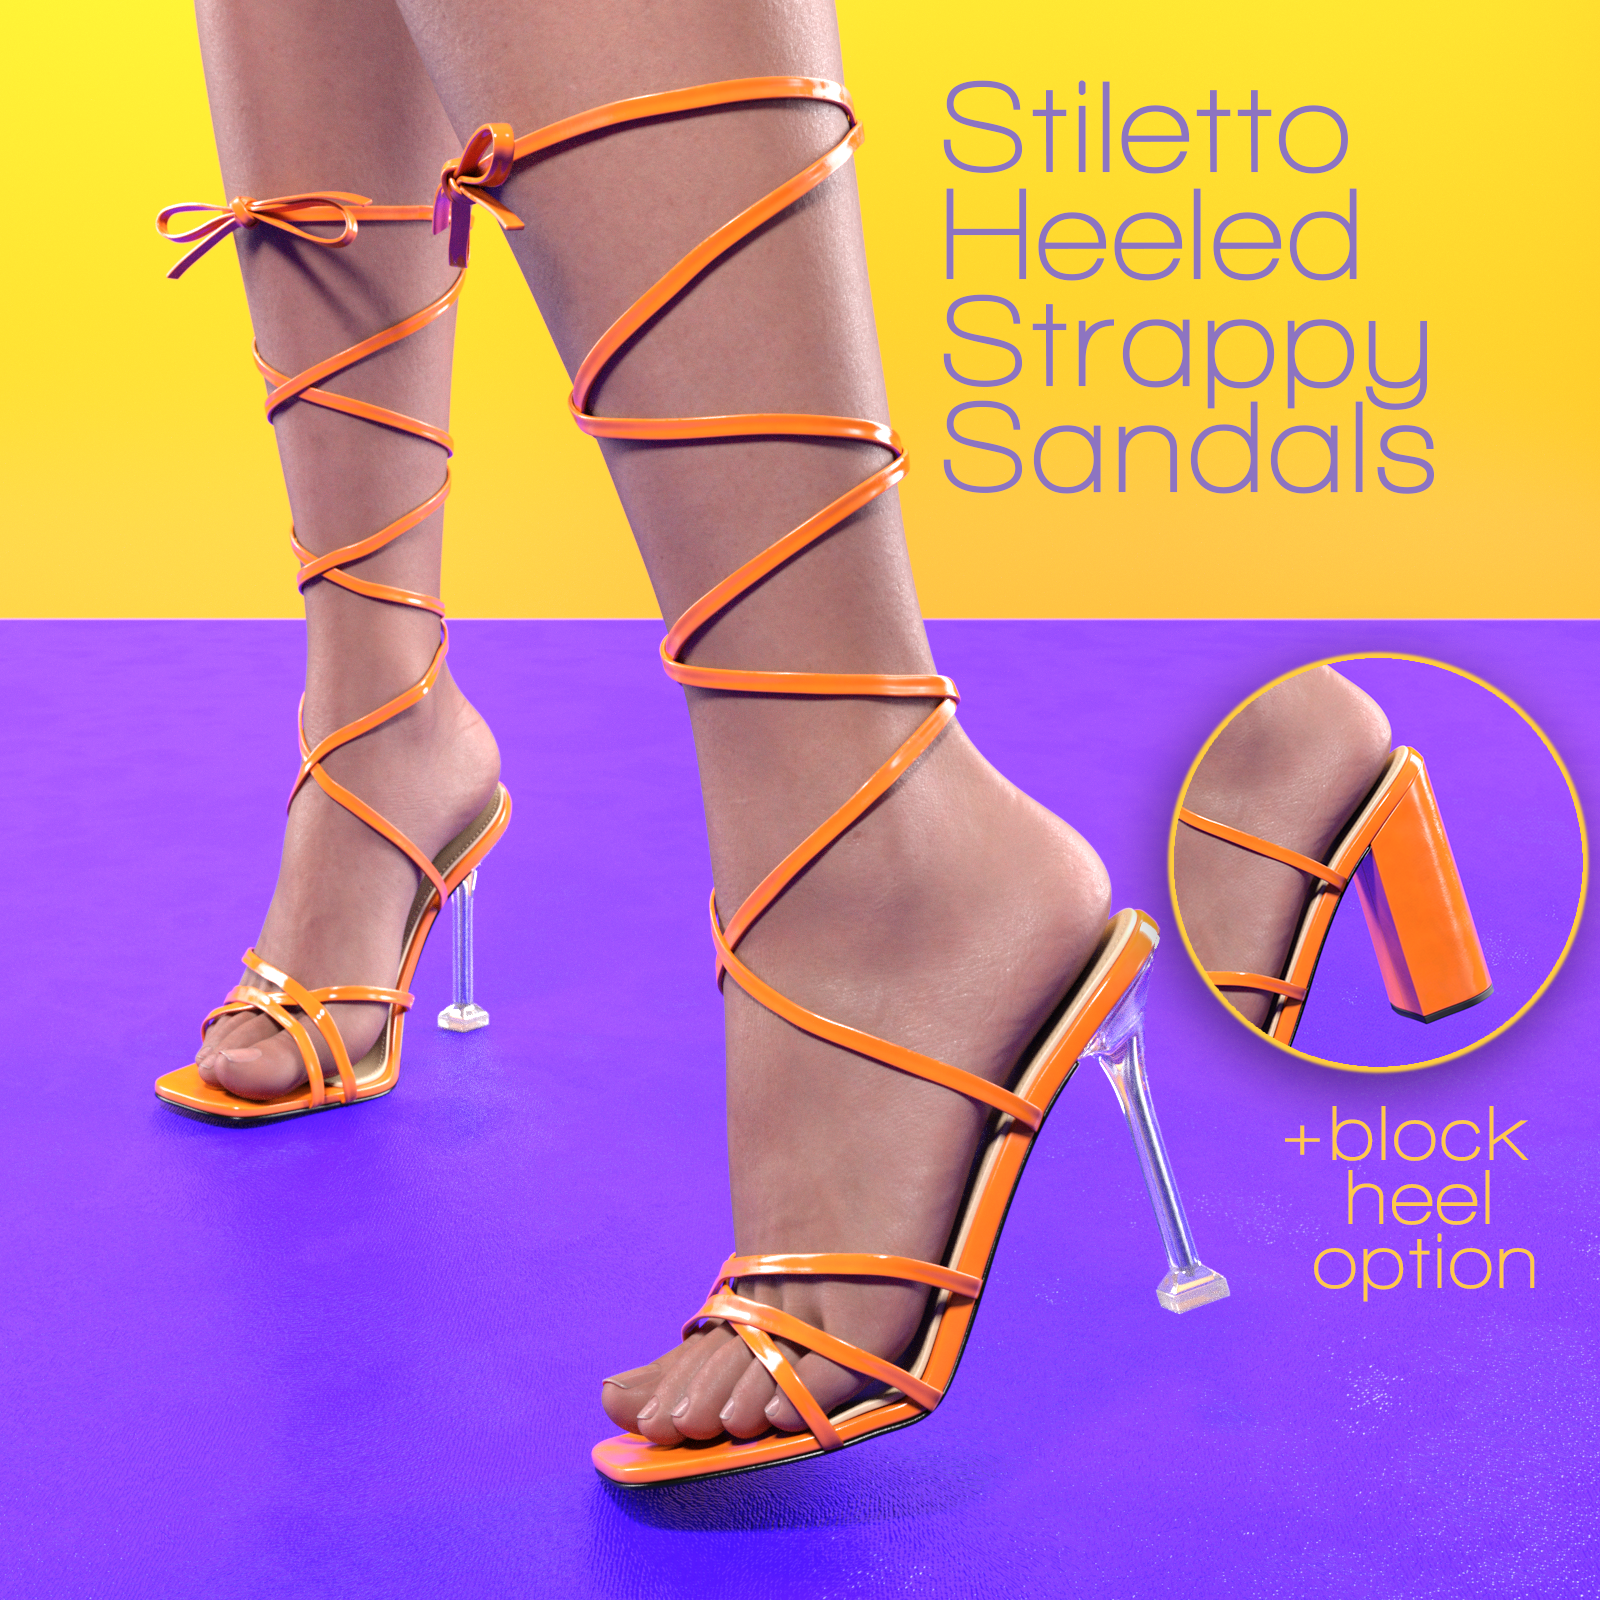 Stiletto Heeled Strappy Sandals for G8F&G9 by: devianttuna13, 3D Models by Daz 3D